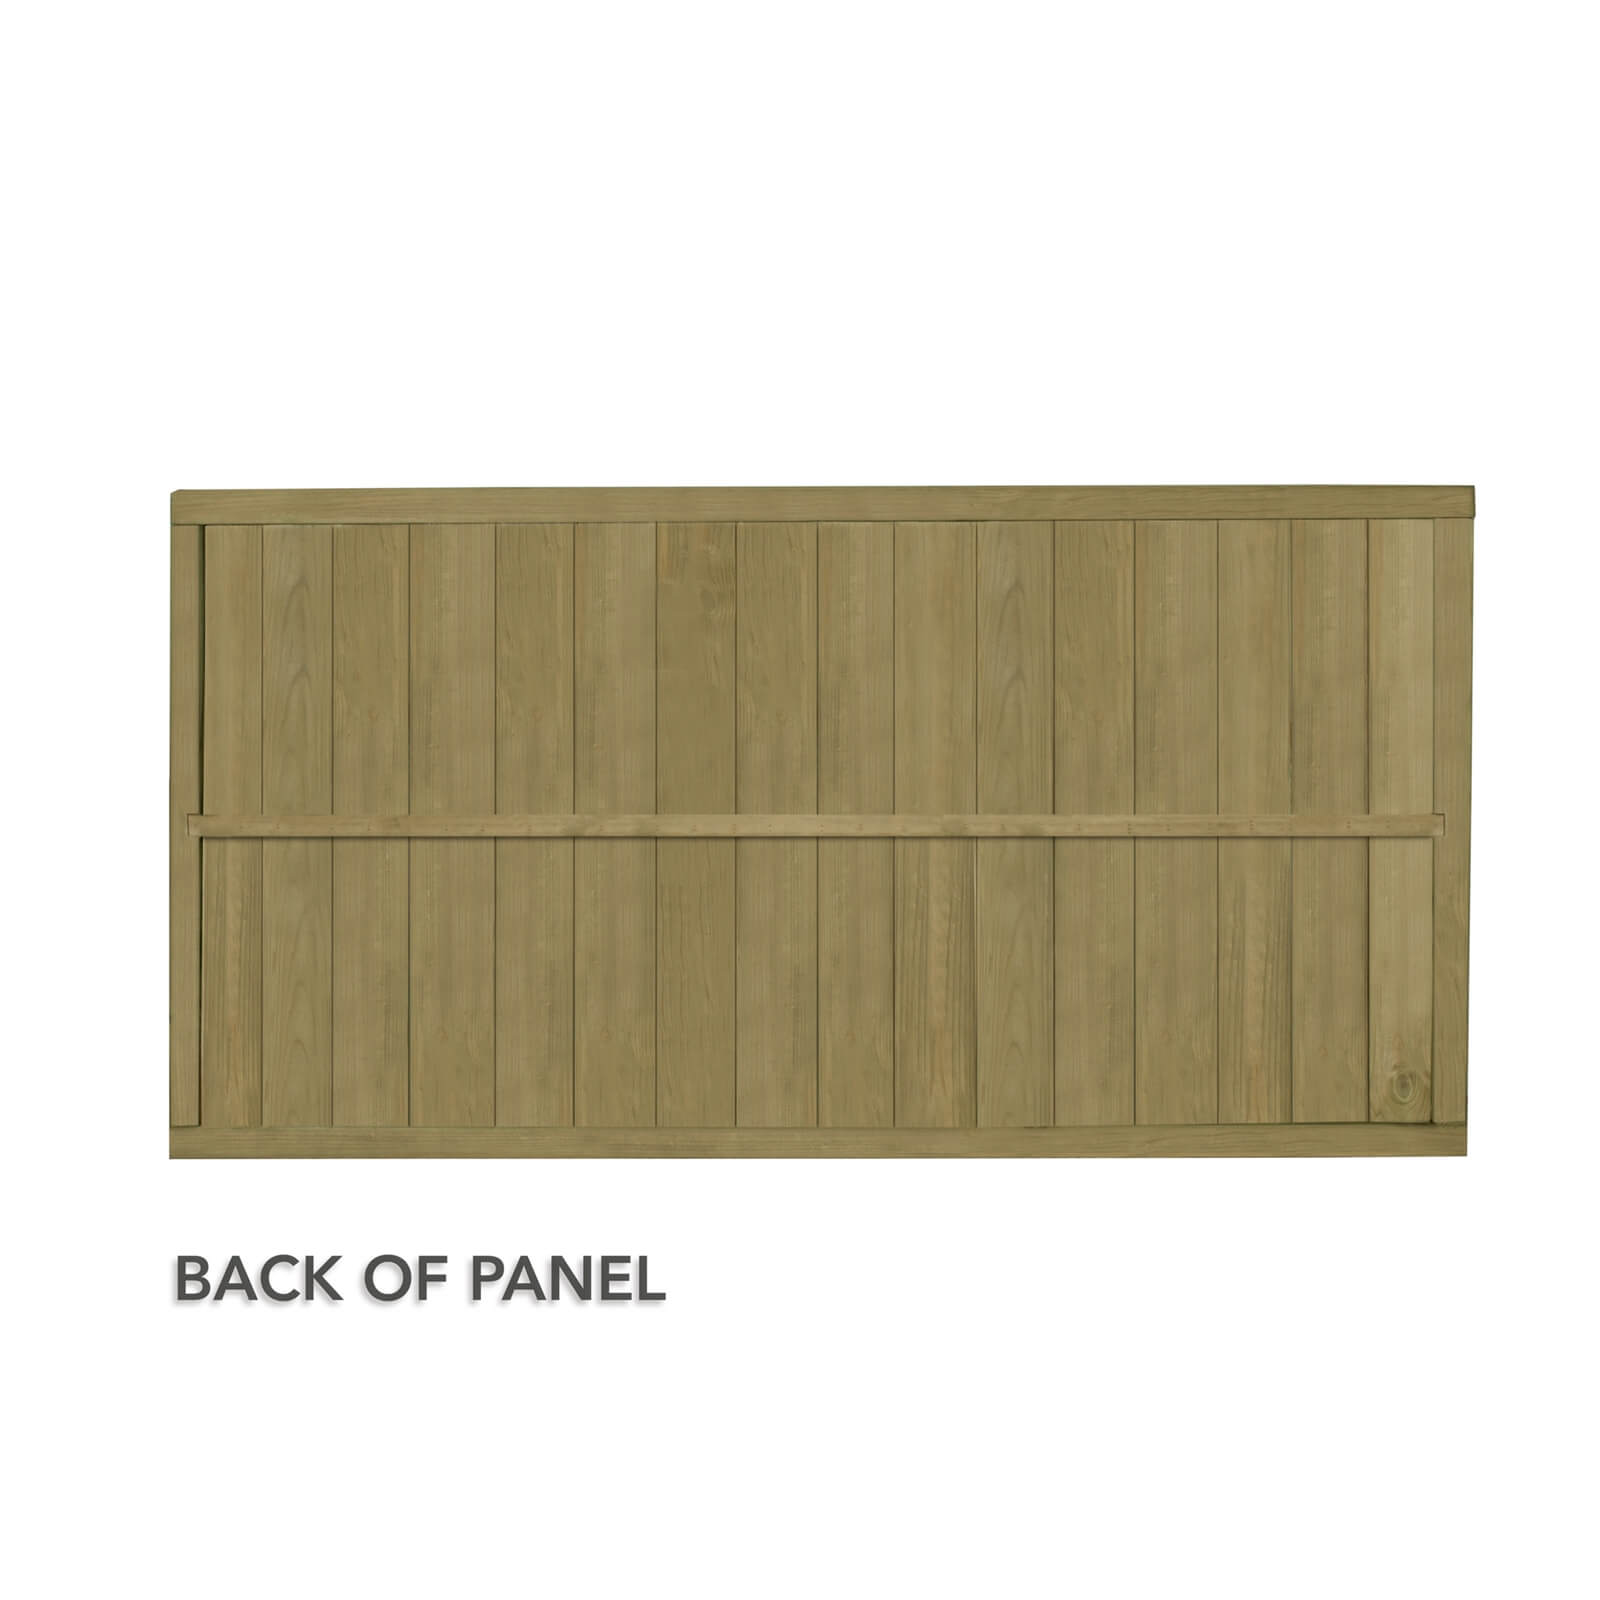 Forest Vertical Tongue & Groove Fence Panel - 3ft - Pack of 4